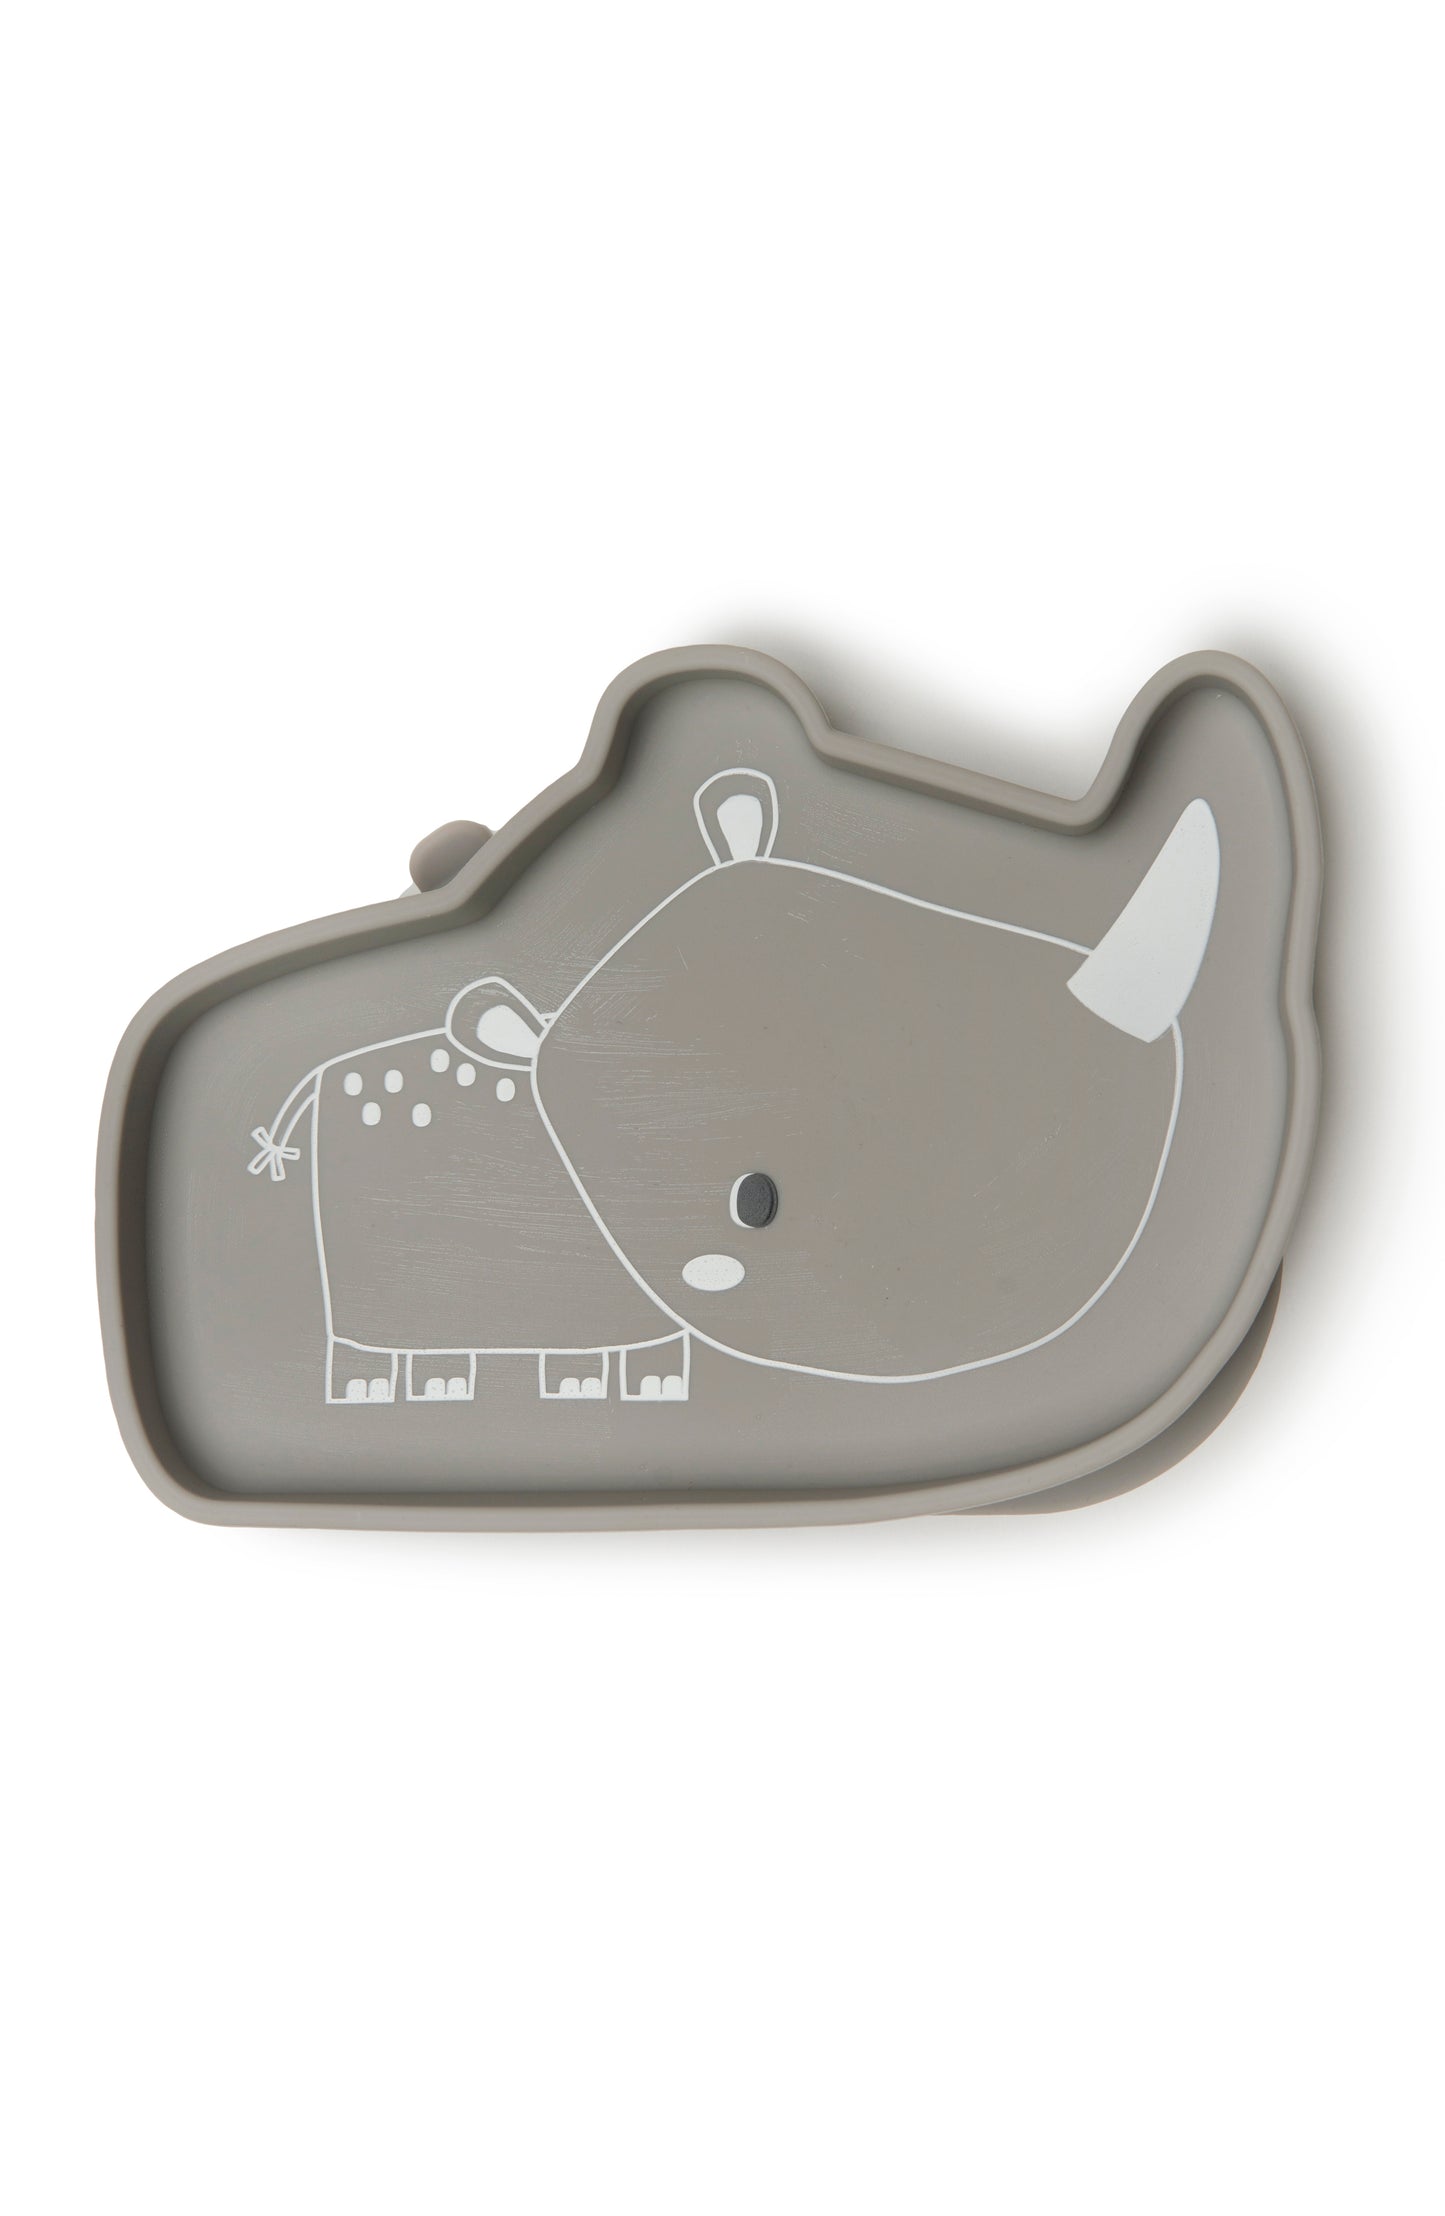 Born to Be Wild Silicone Snack Plate - Loulou Lollipop